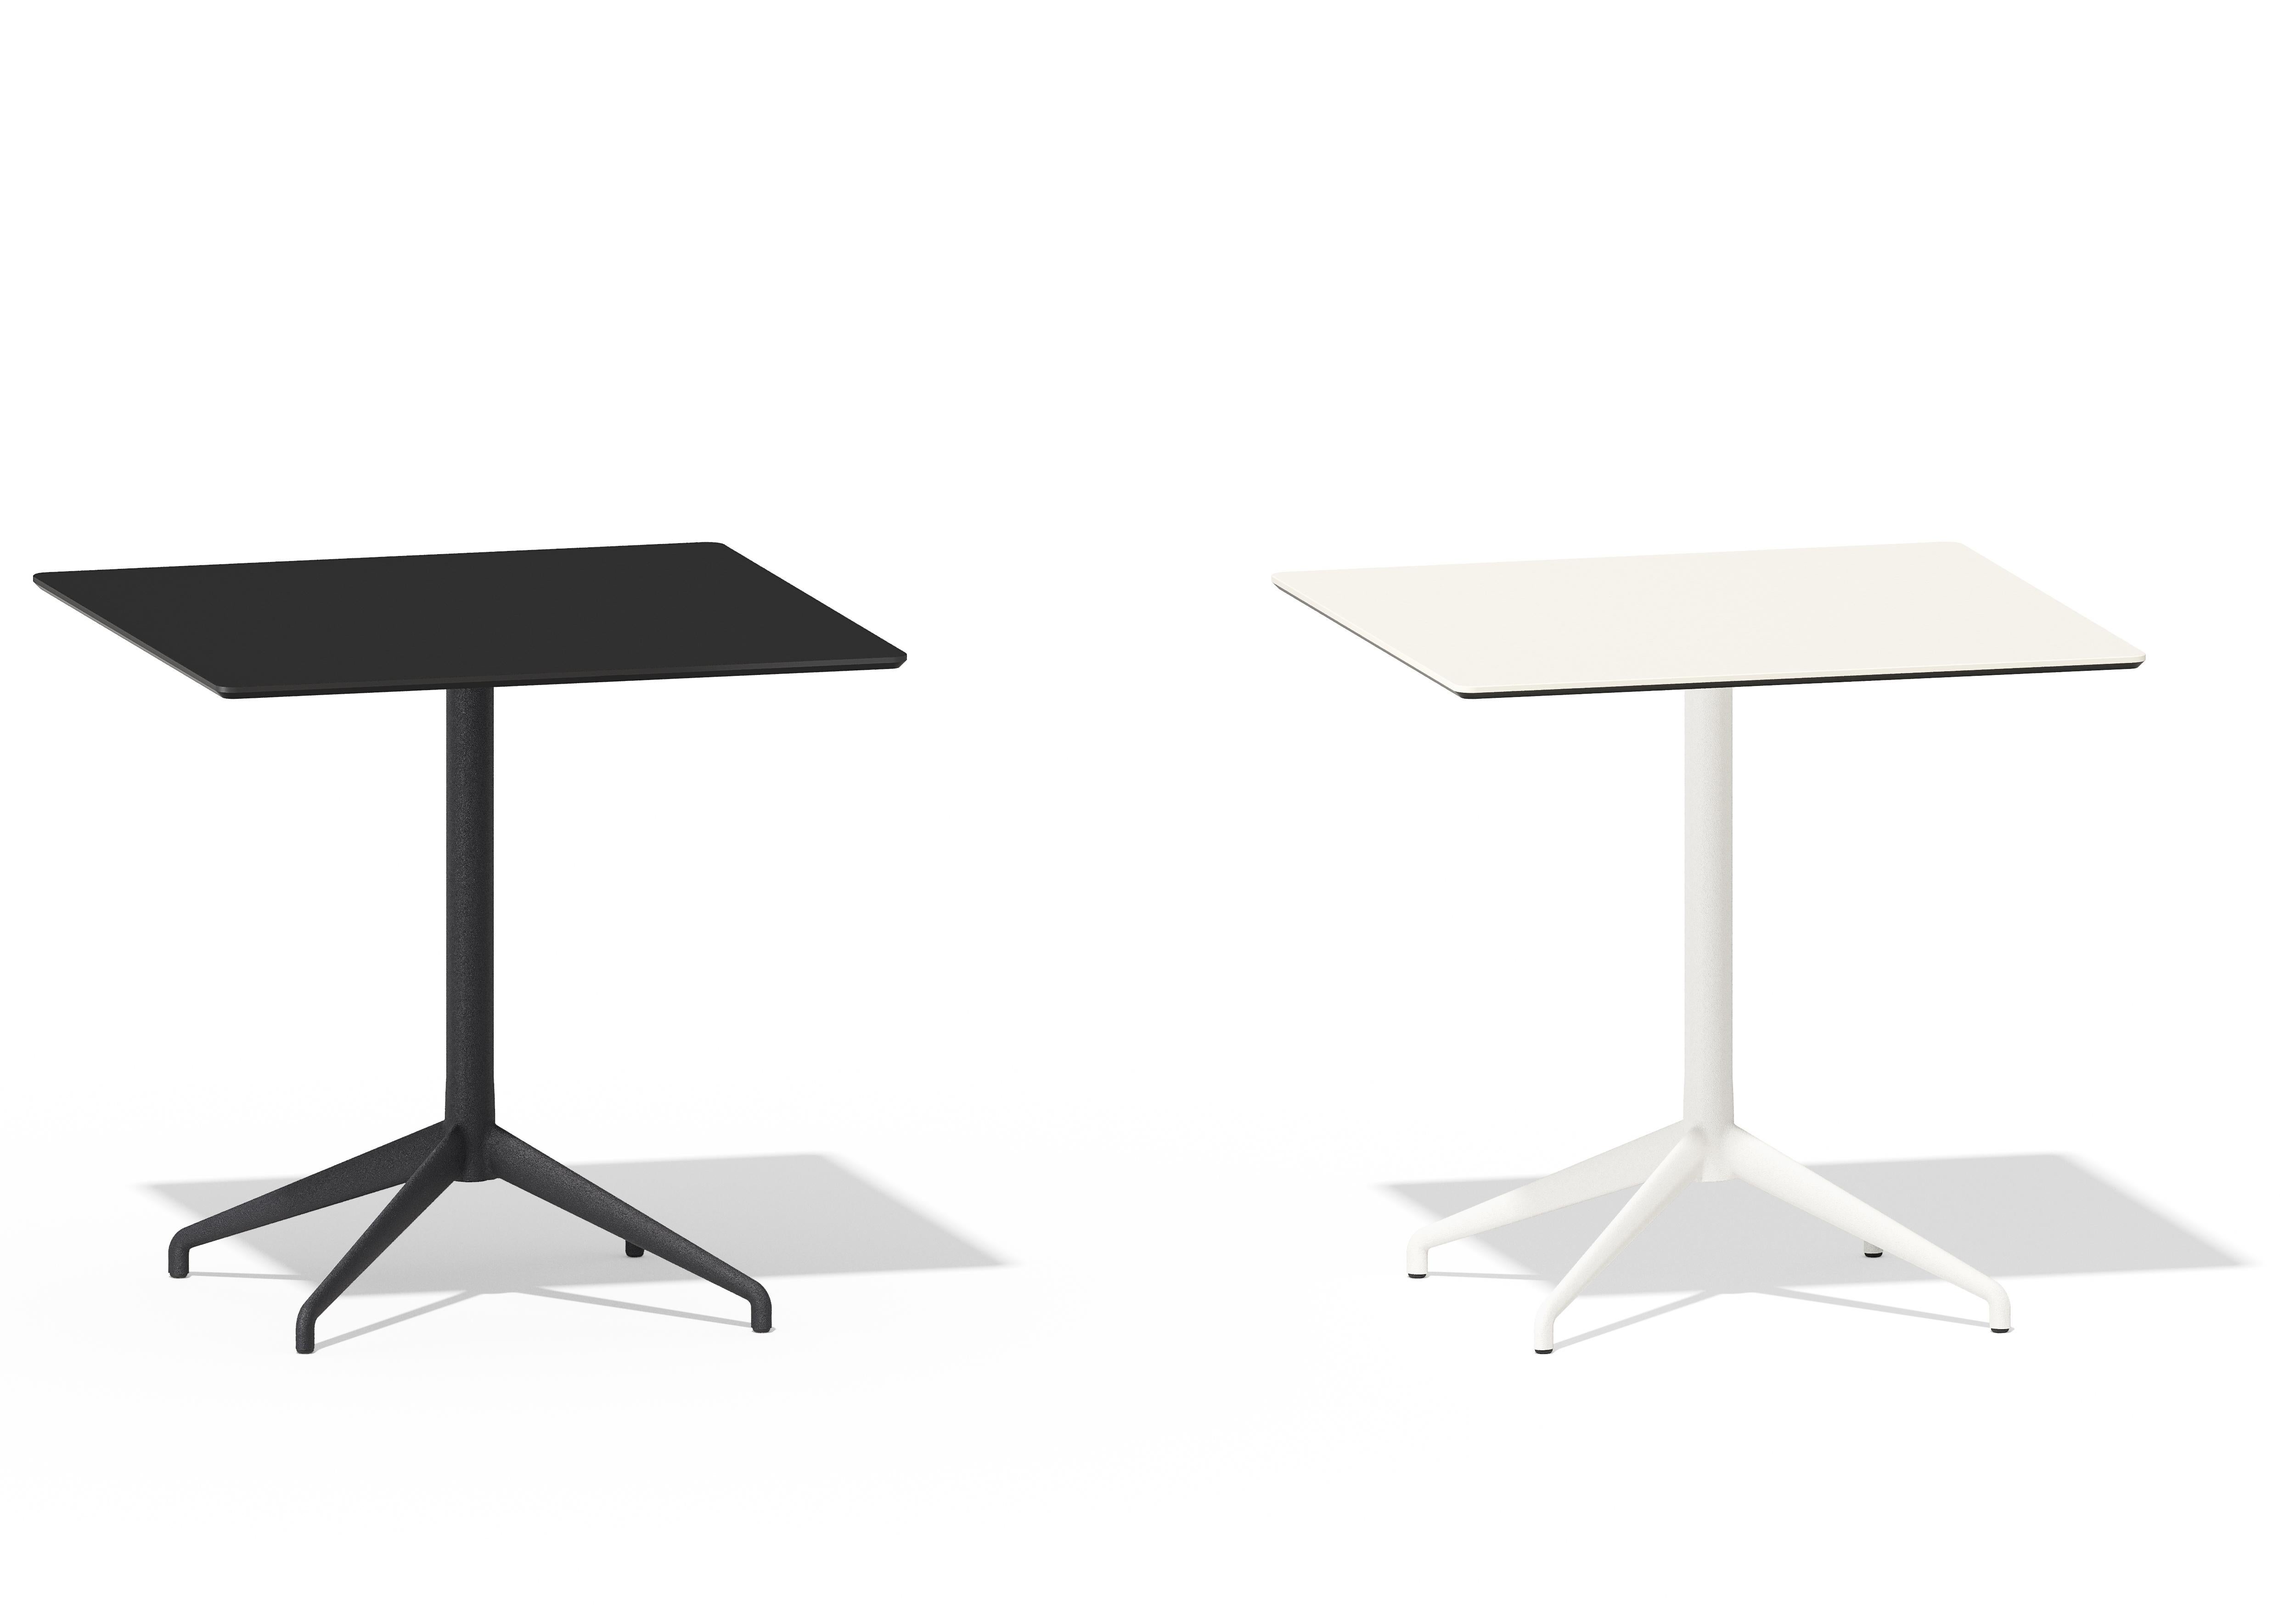 Alis Square Table, Aluminium Base and Ceramic Top, by Discipline Lab In New Condition For Sale In Biancade, IT